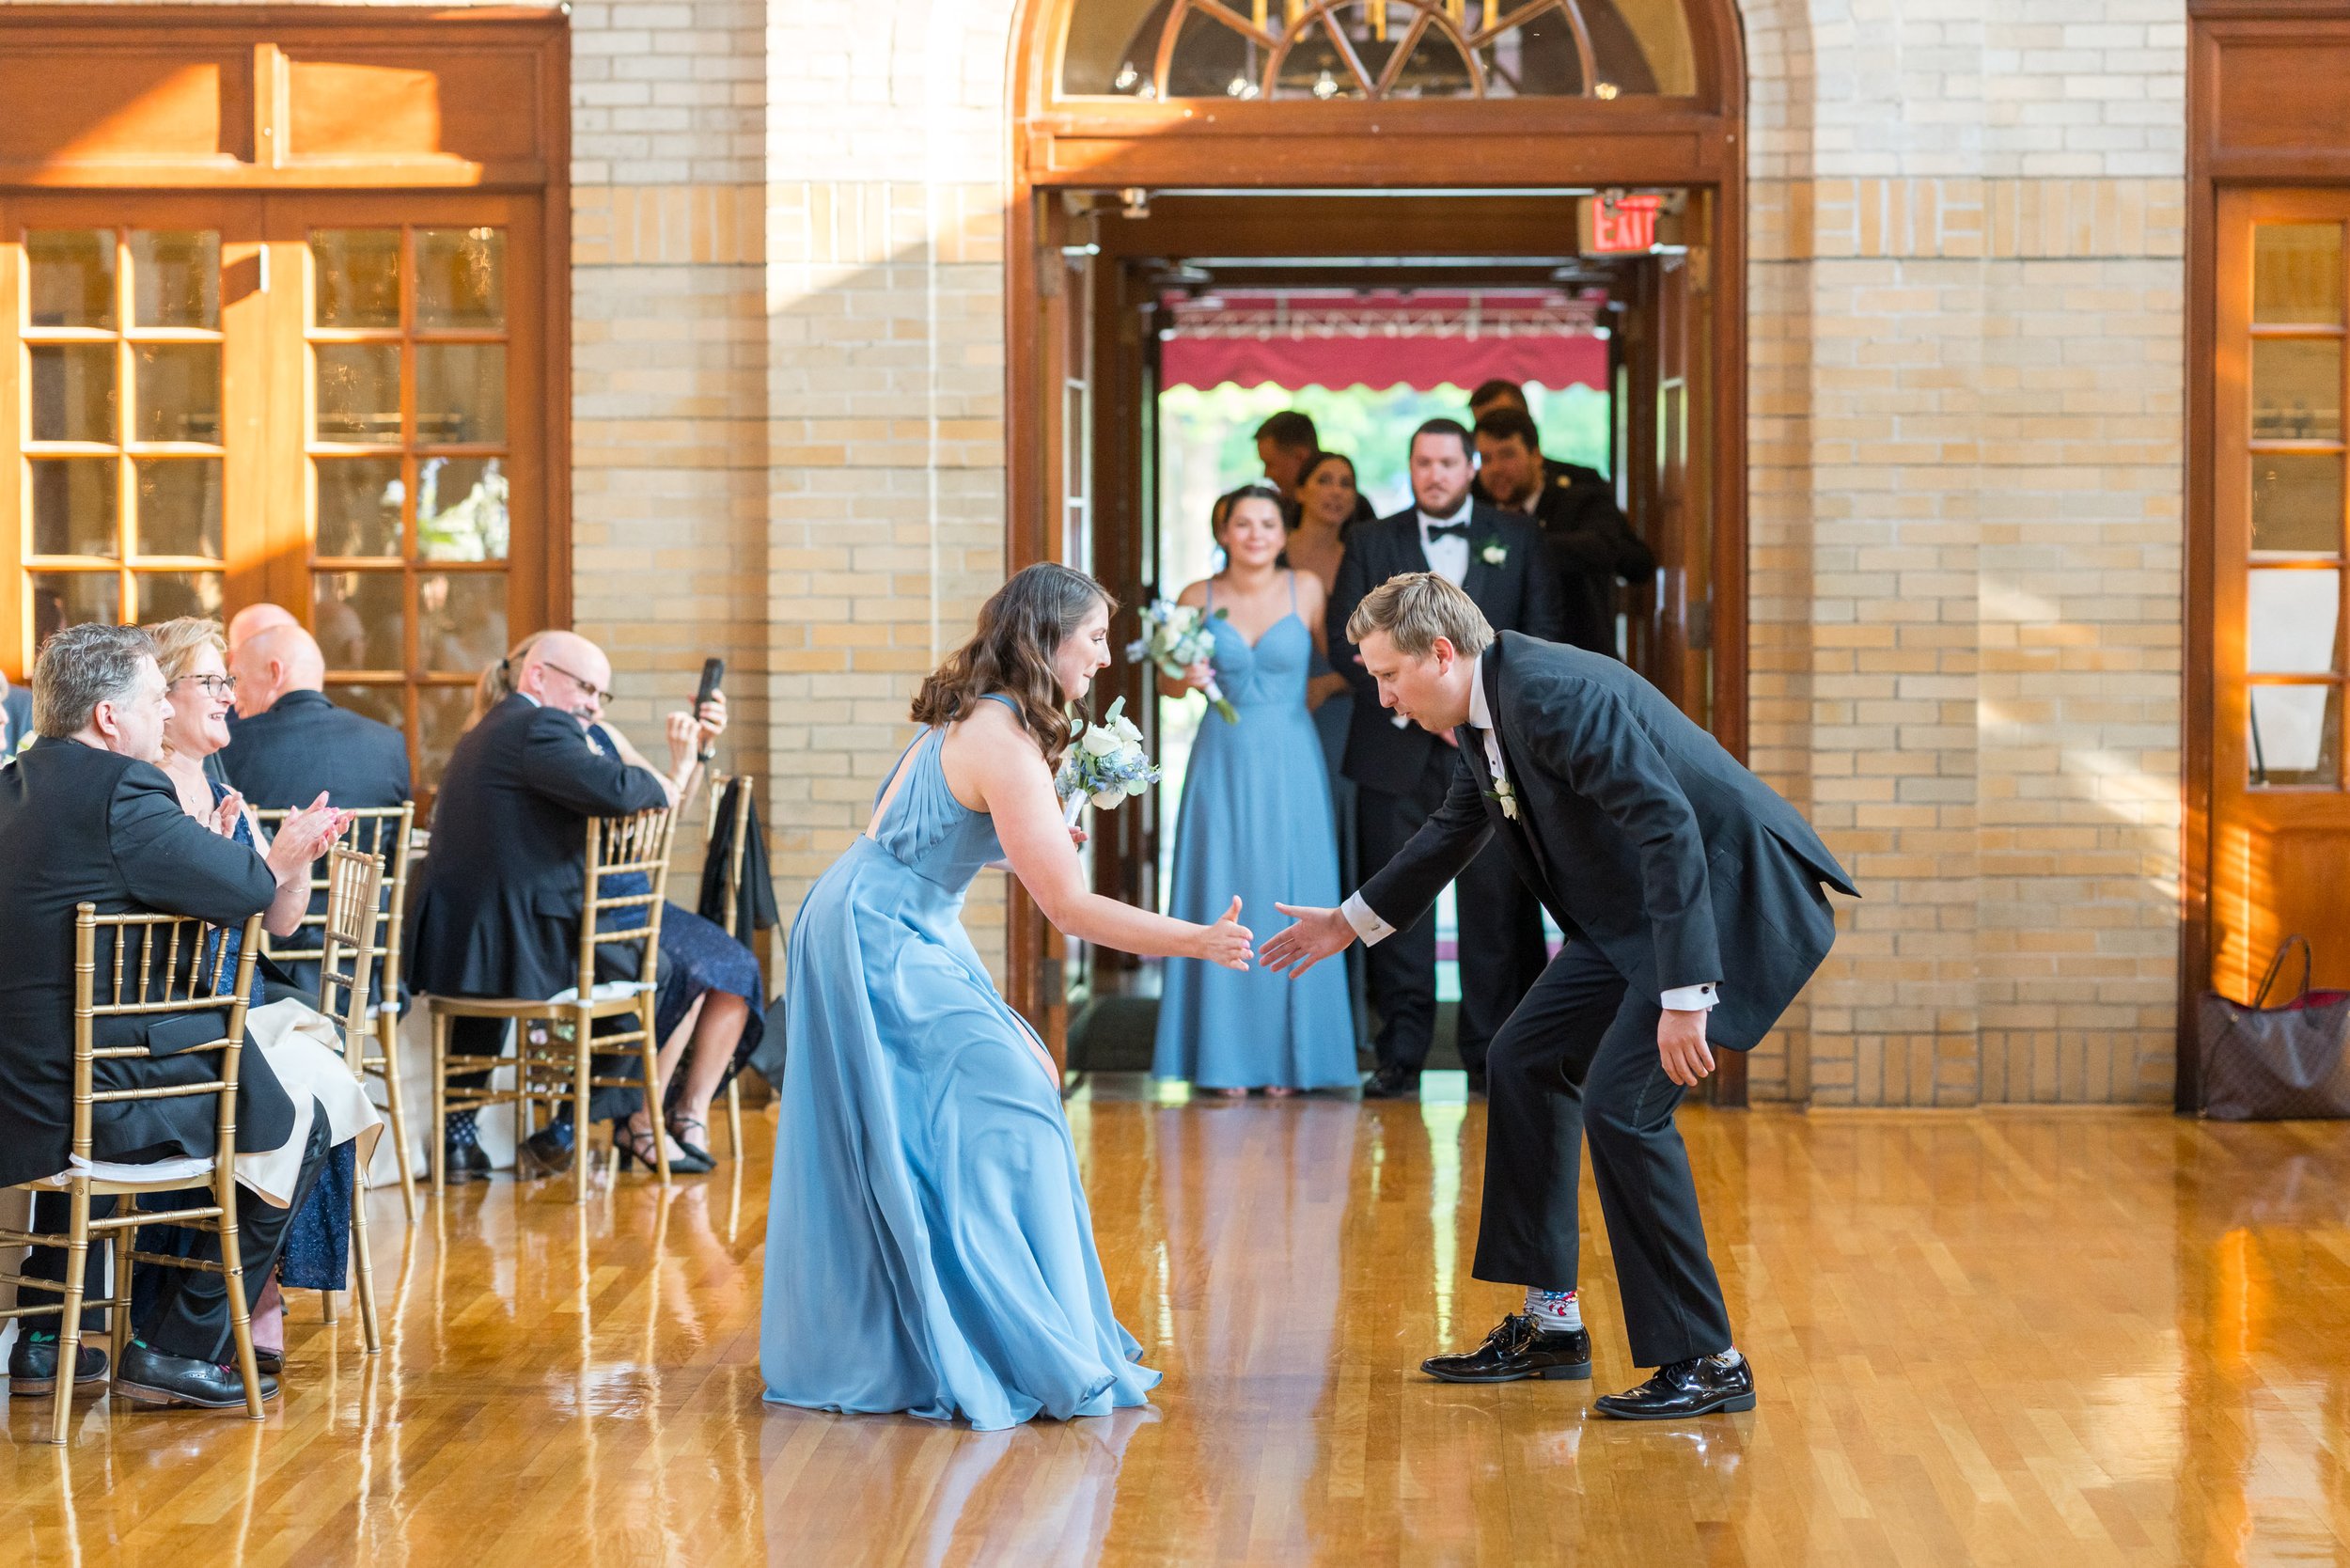 Fun bridesmaids in blue and groomsmen grand entrances fun and candid